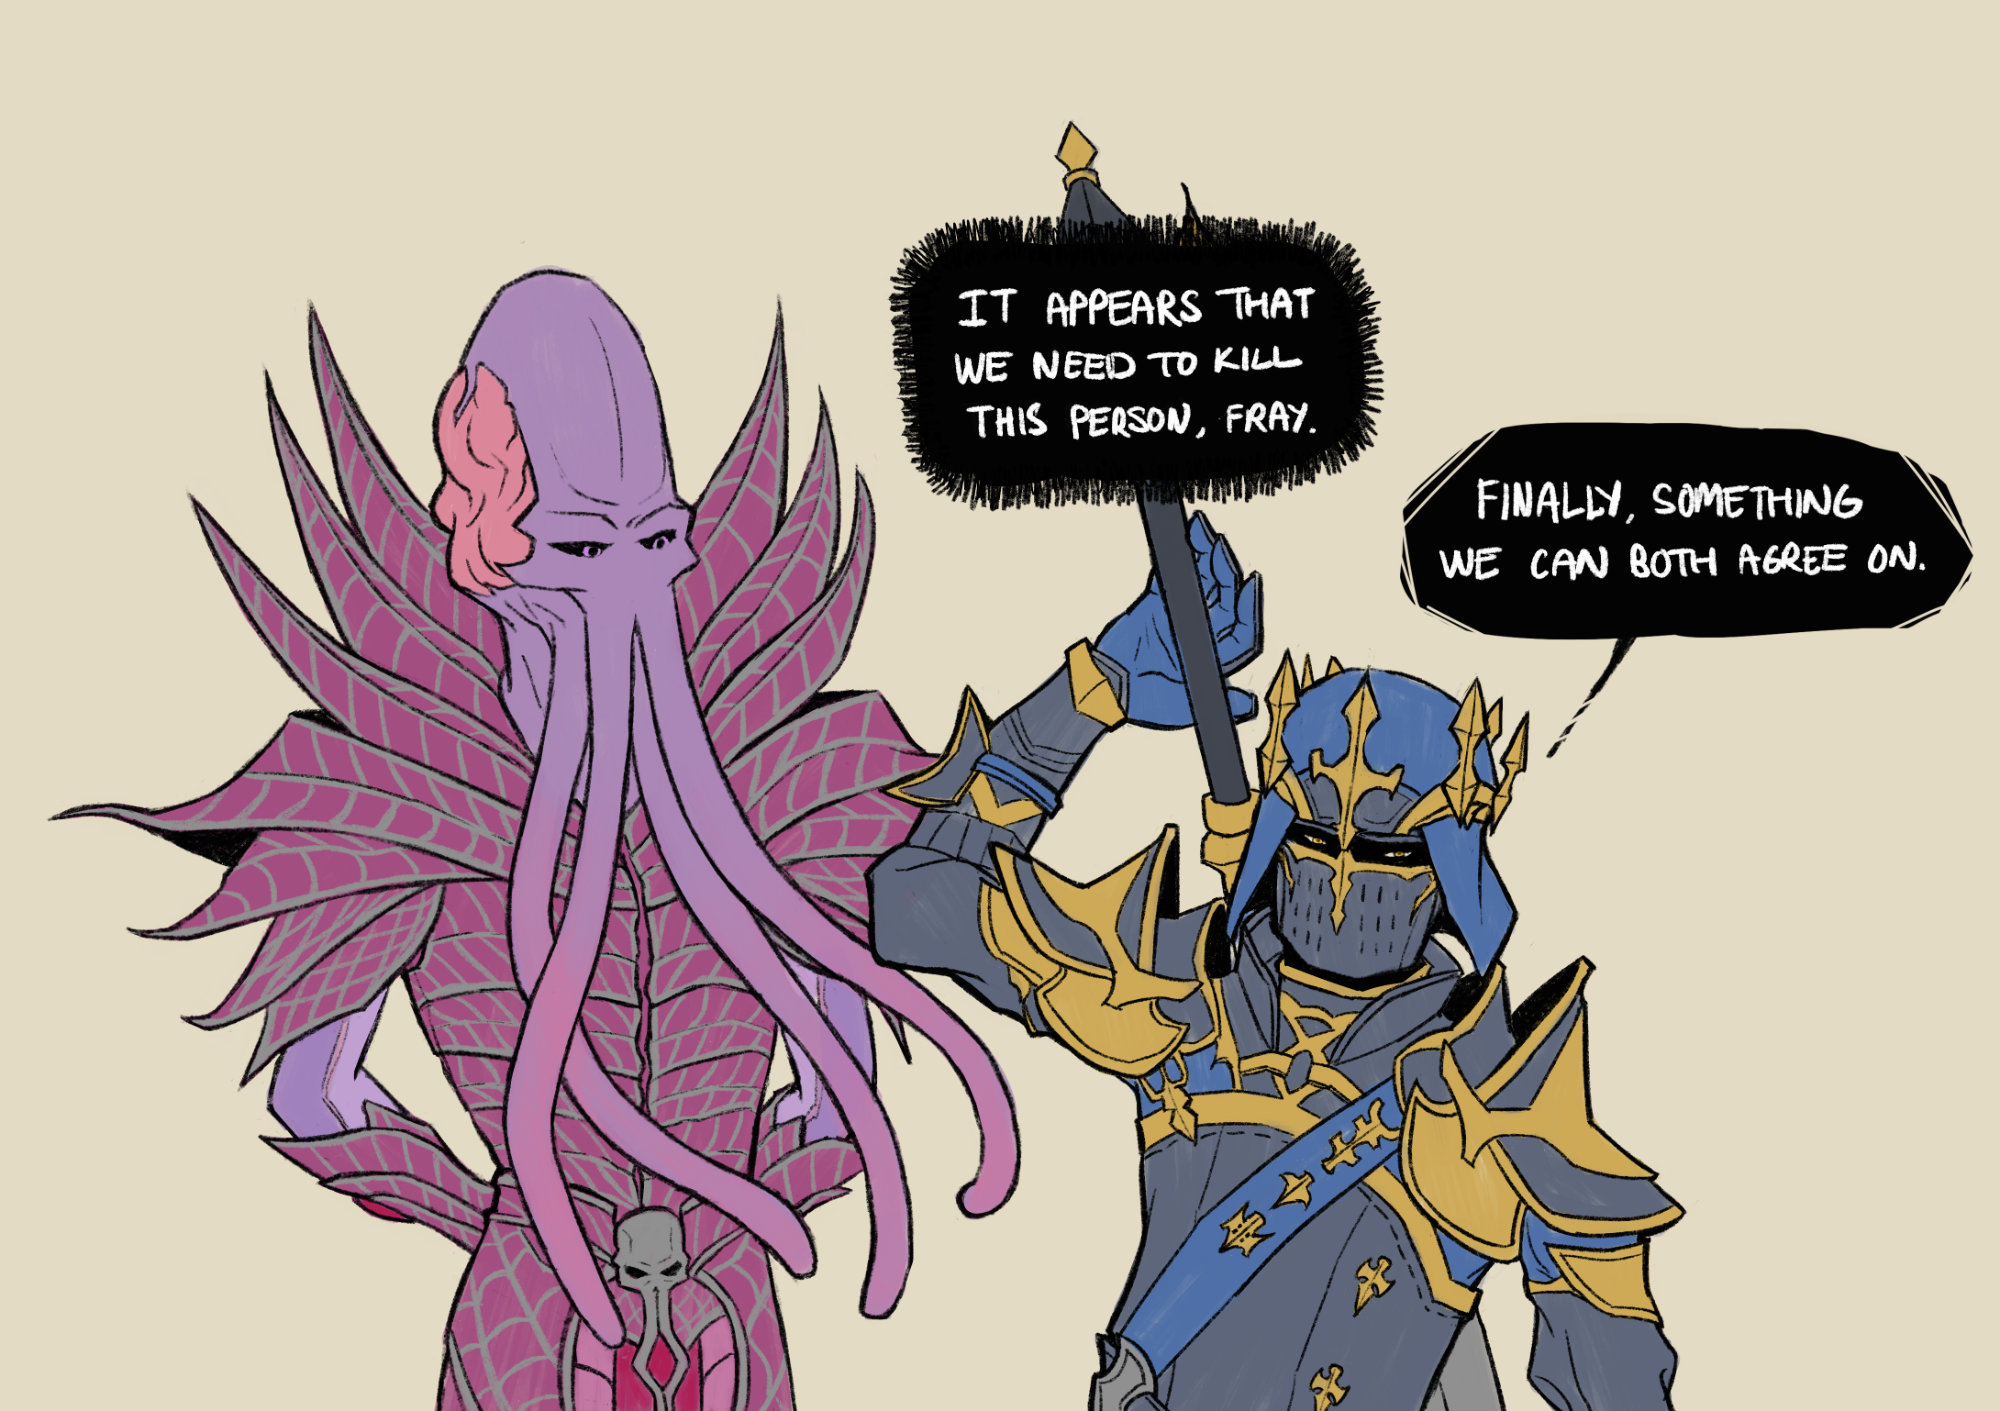 The Emperor from BG3 and Fray from FFXIV are standing next to each other. The Emperor has its arms behind its back, and Fray is reaching behind them for their claymore. The Emperor says, 'It appears we need to kill this person, Fray.' and Fray responds, 'Finally, something we can both agree on.'